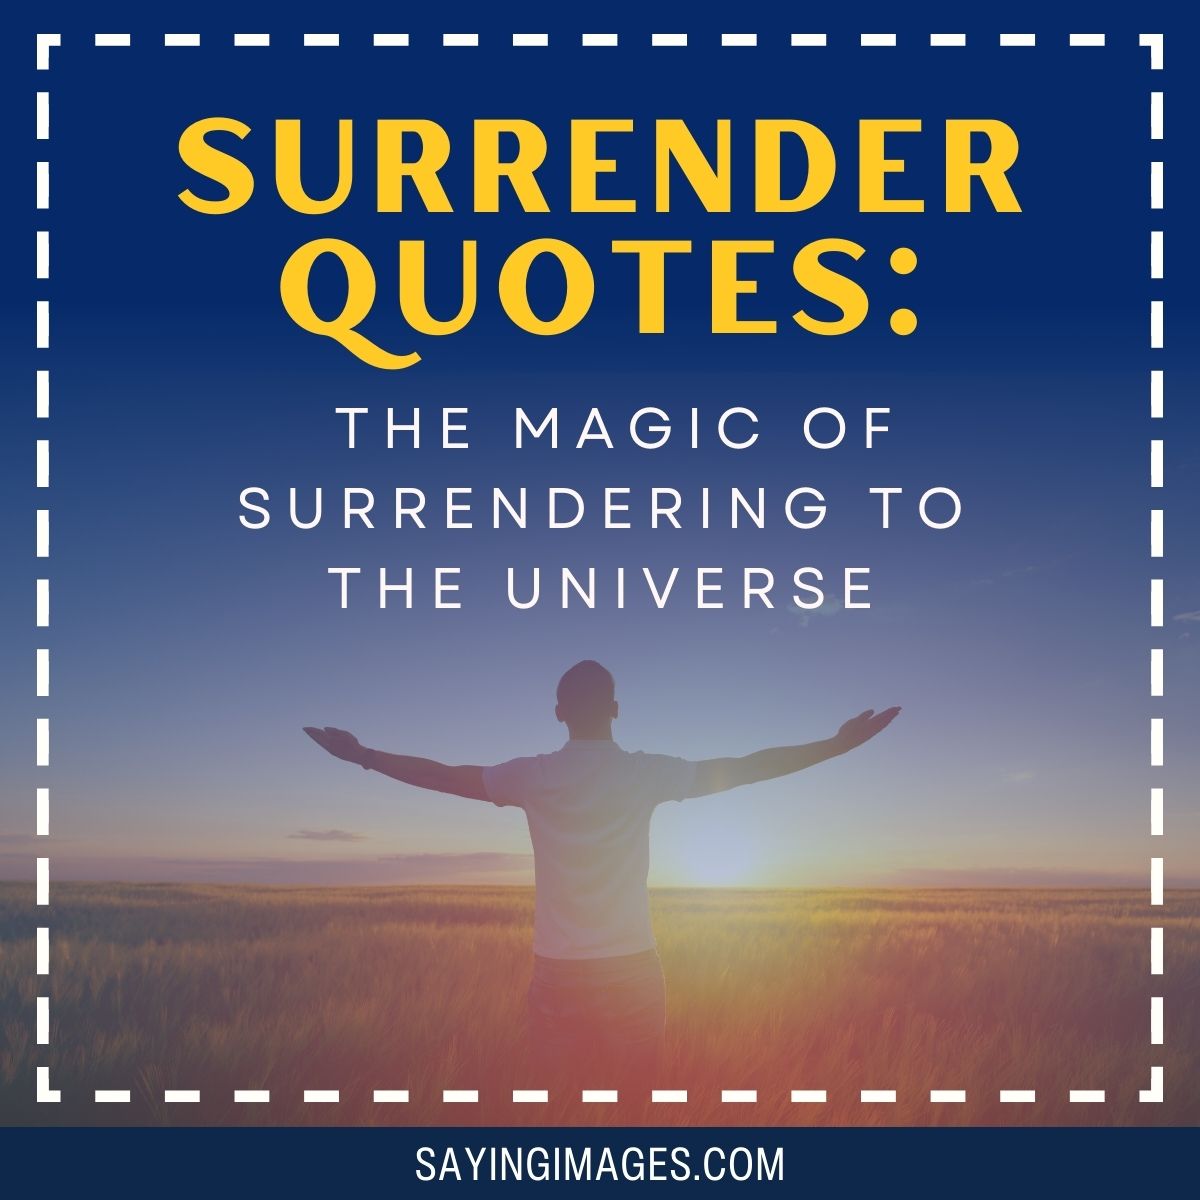 Quotes That Show The Magic Of Surrendering To The Universe